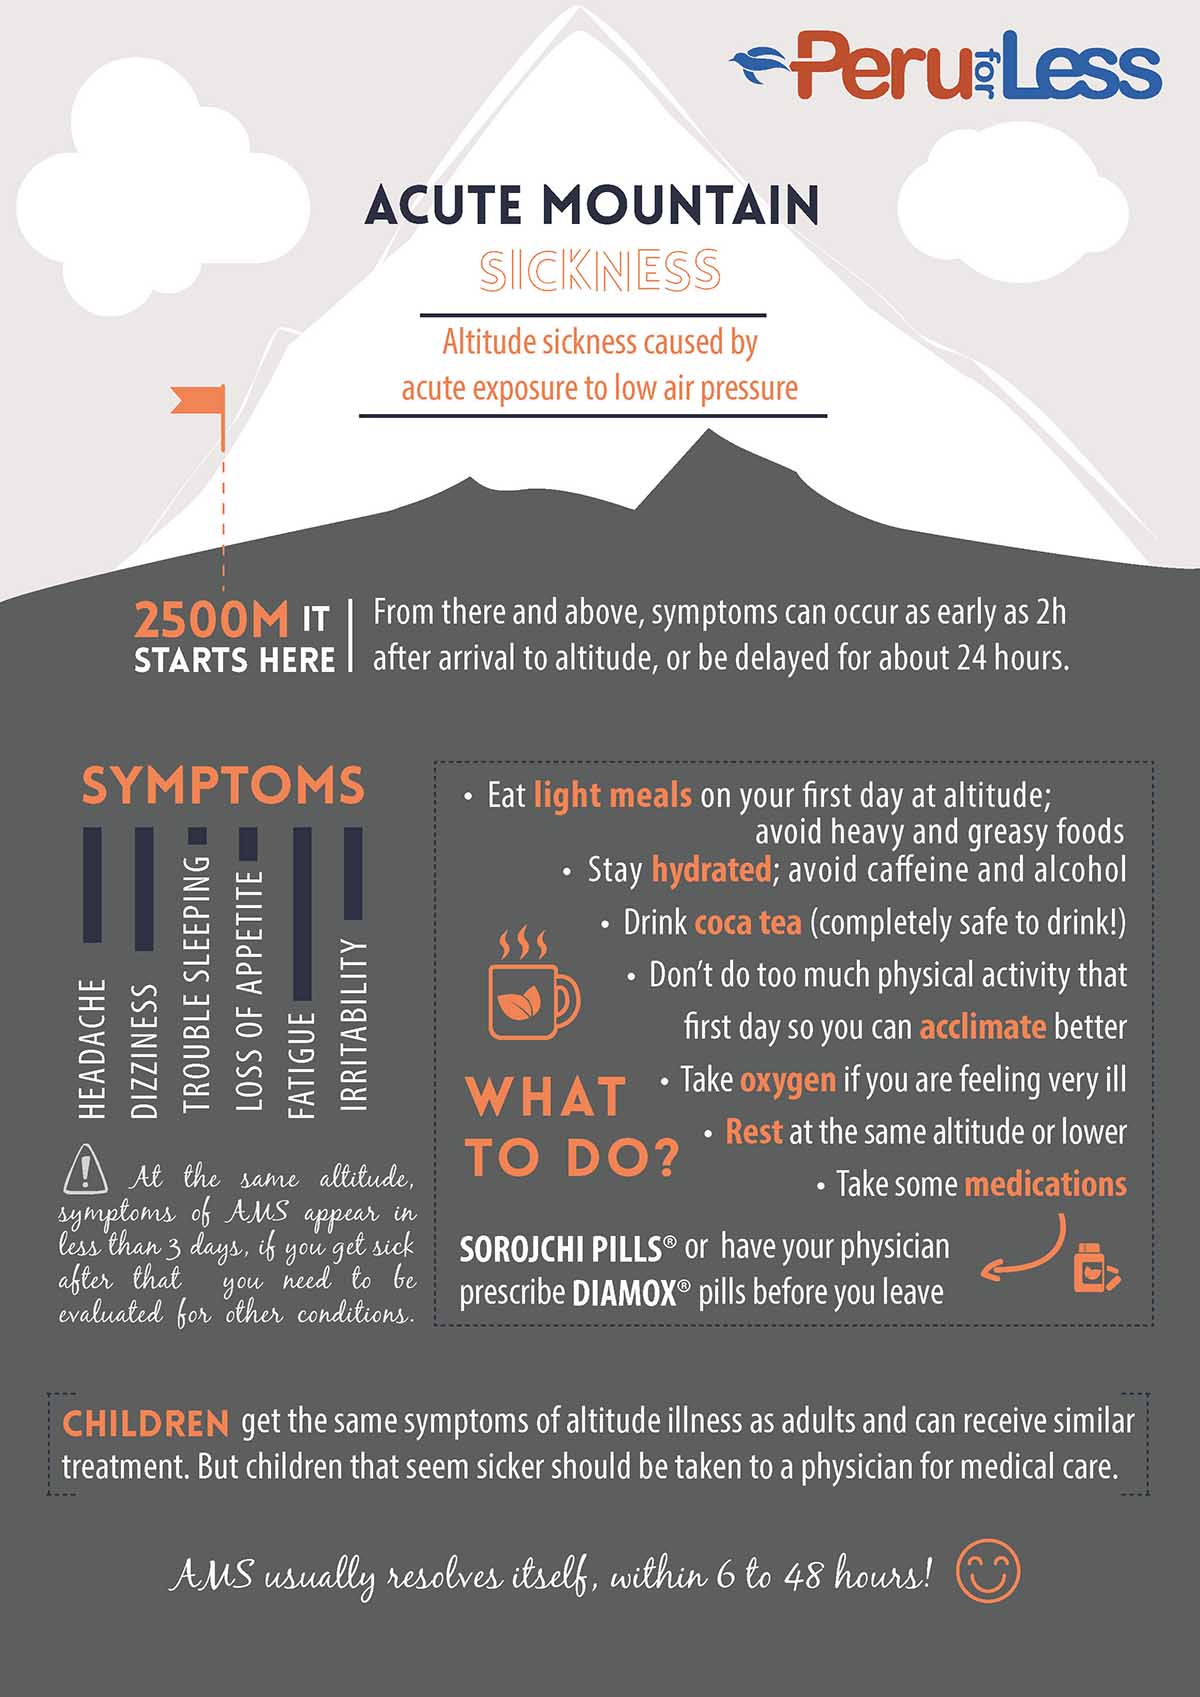 Altitude sickness symptoms include headache and fatigue. Eat light meals and stay hydrated. 